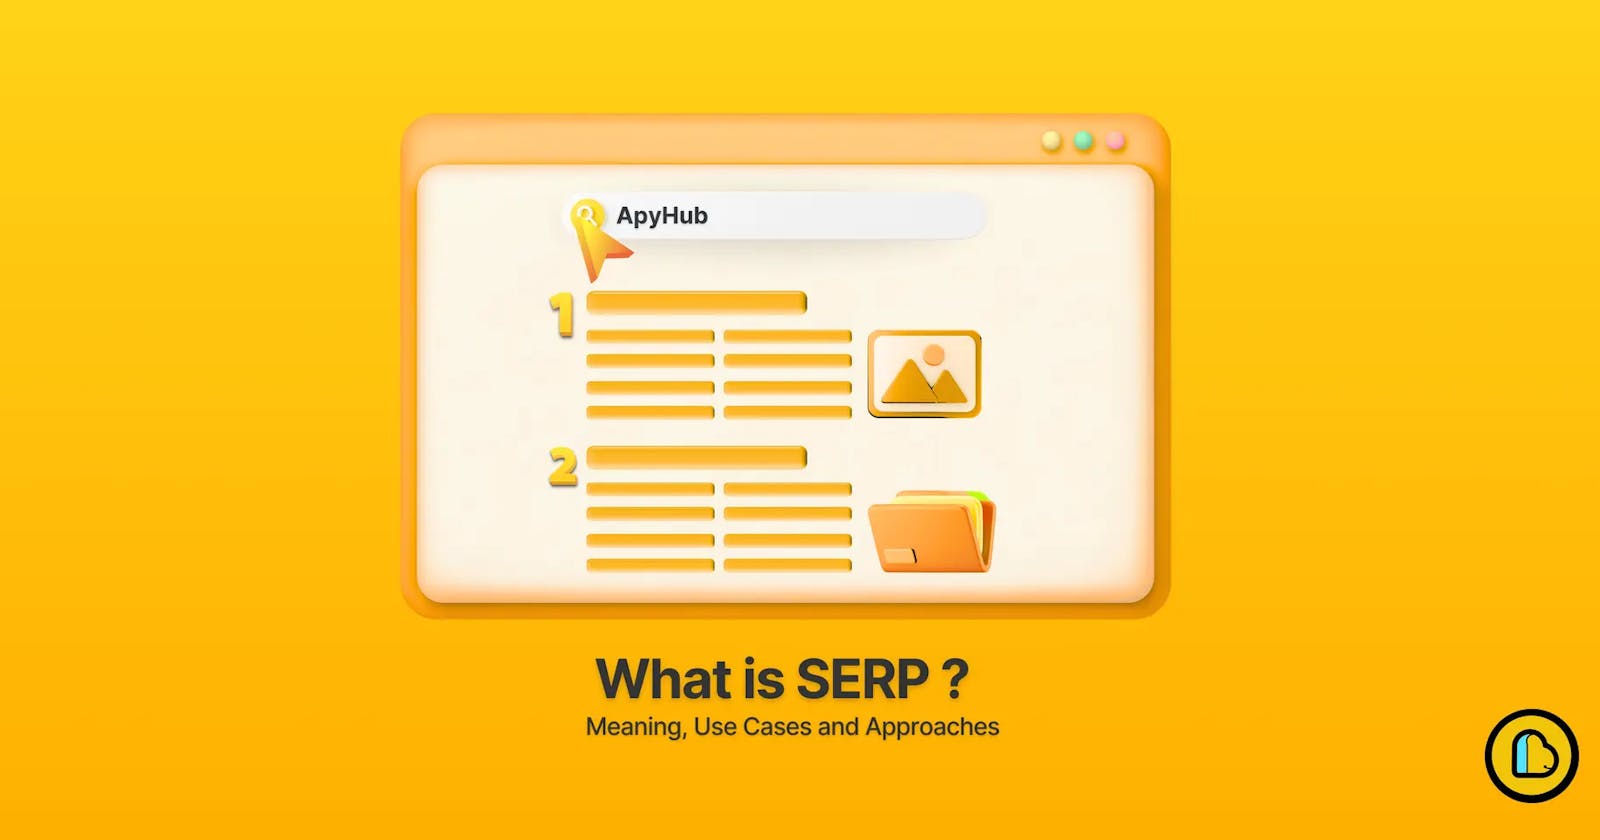 What is SERP? Meaning, Use Cases and Approaches